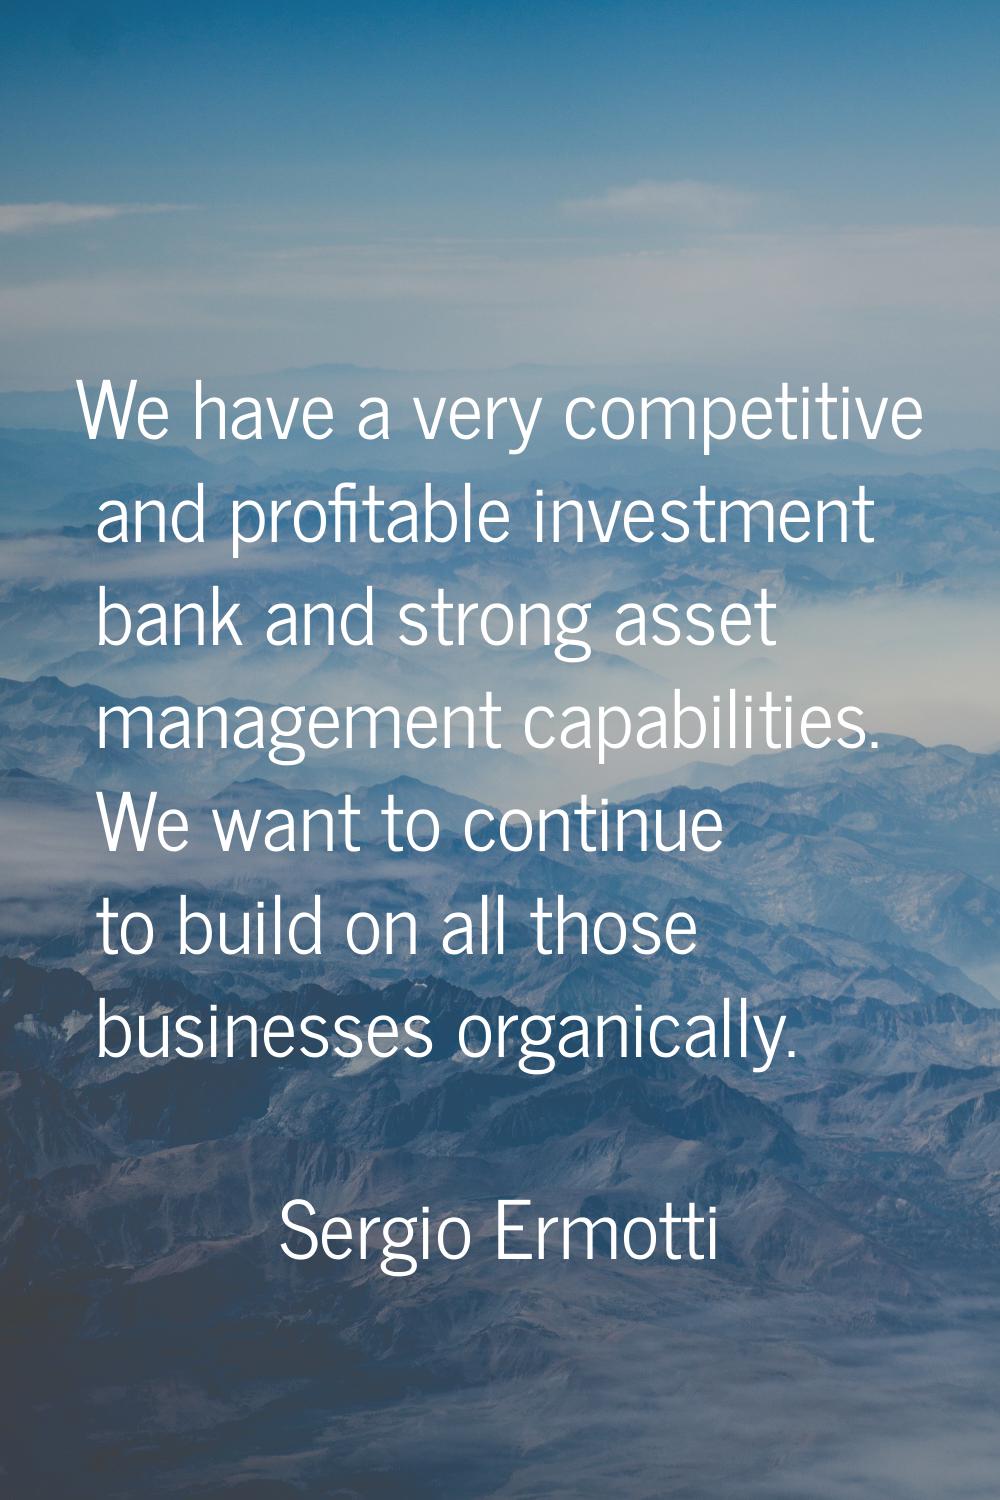 We have a very competitive and profitable investment bank and strong asset management capabilities.